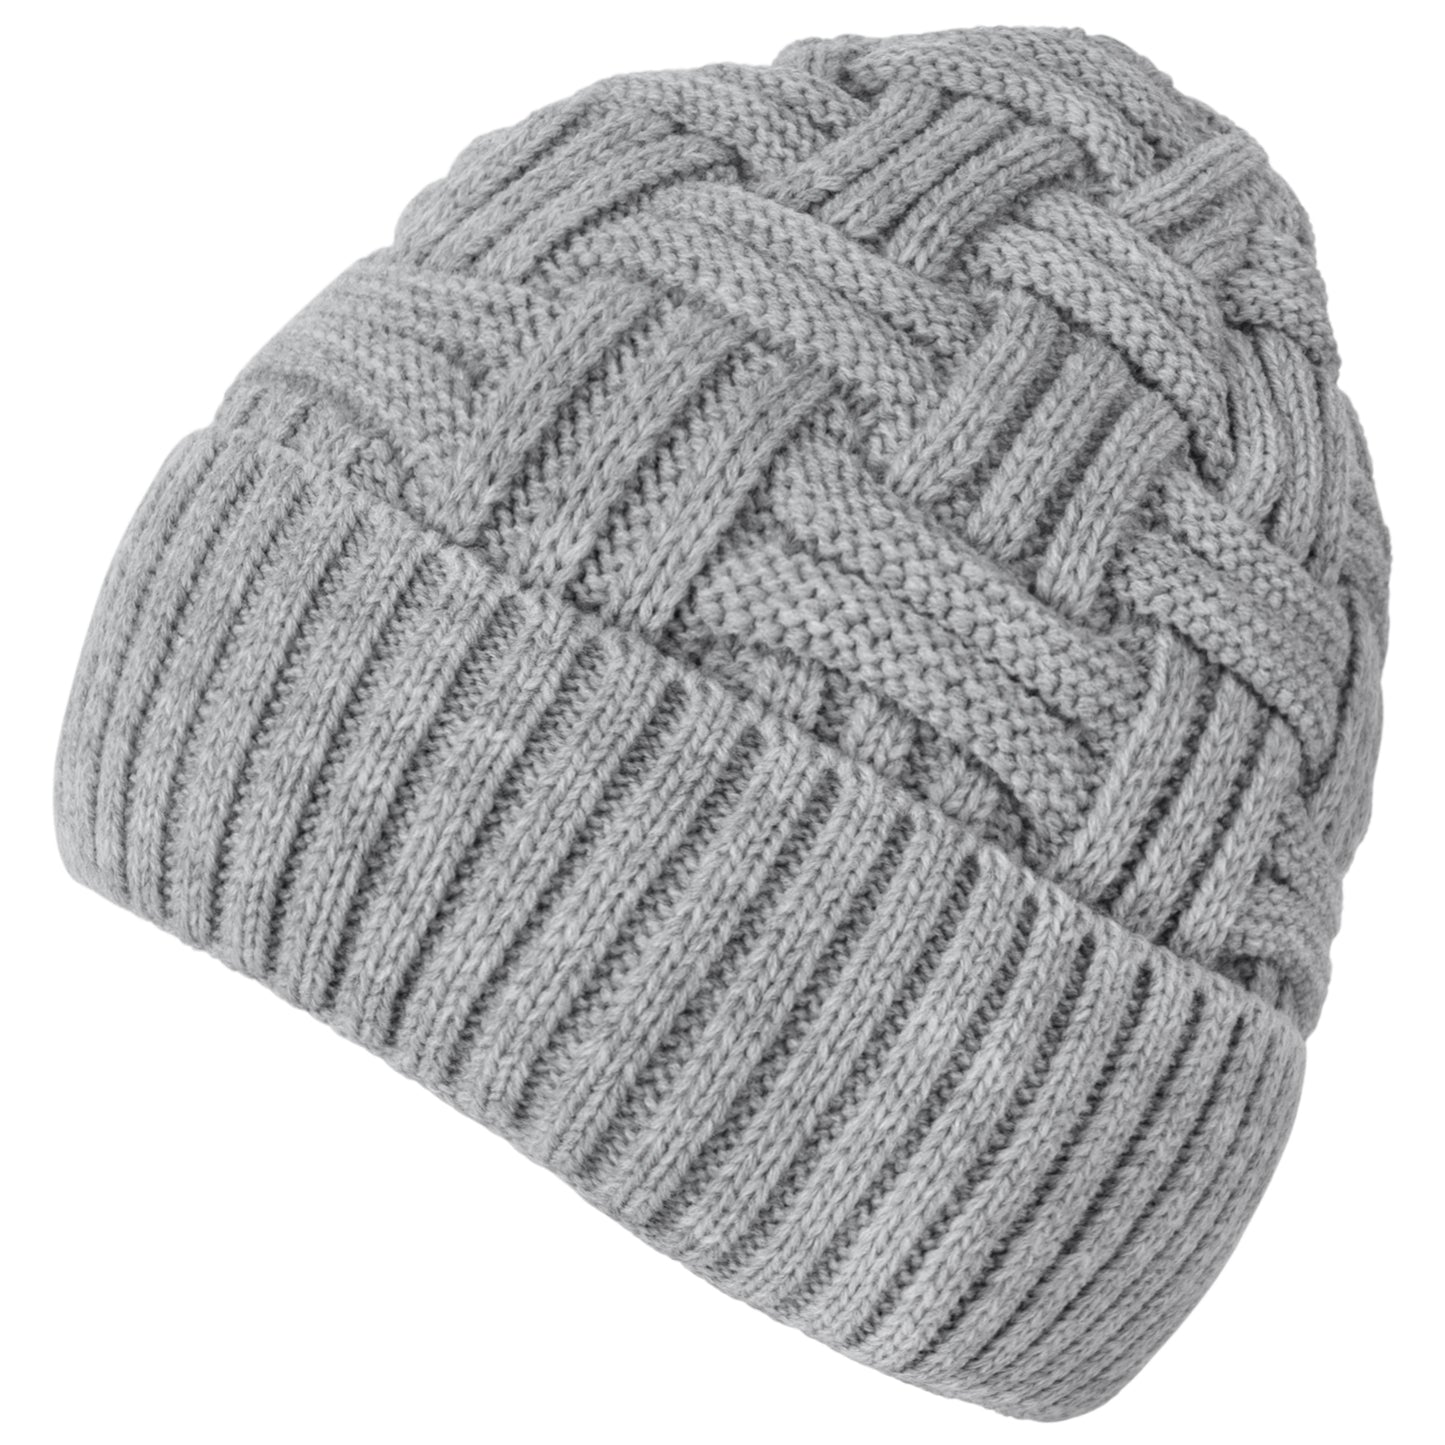 Loritta Winter Hat Warm Knitted Thick Baggy Slouchy Beanie Skull Cap for Men Women Gifts,A-Light Grey With Weave,1 Pack，one size